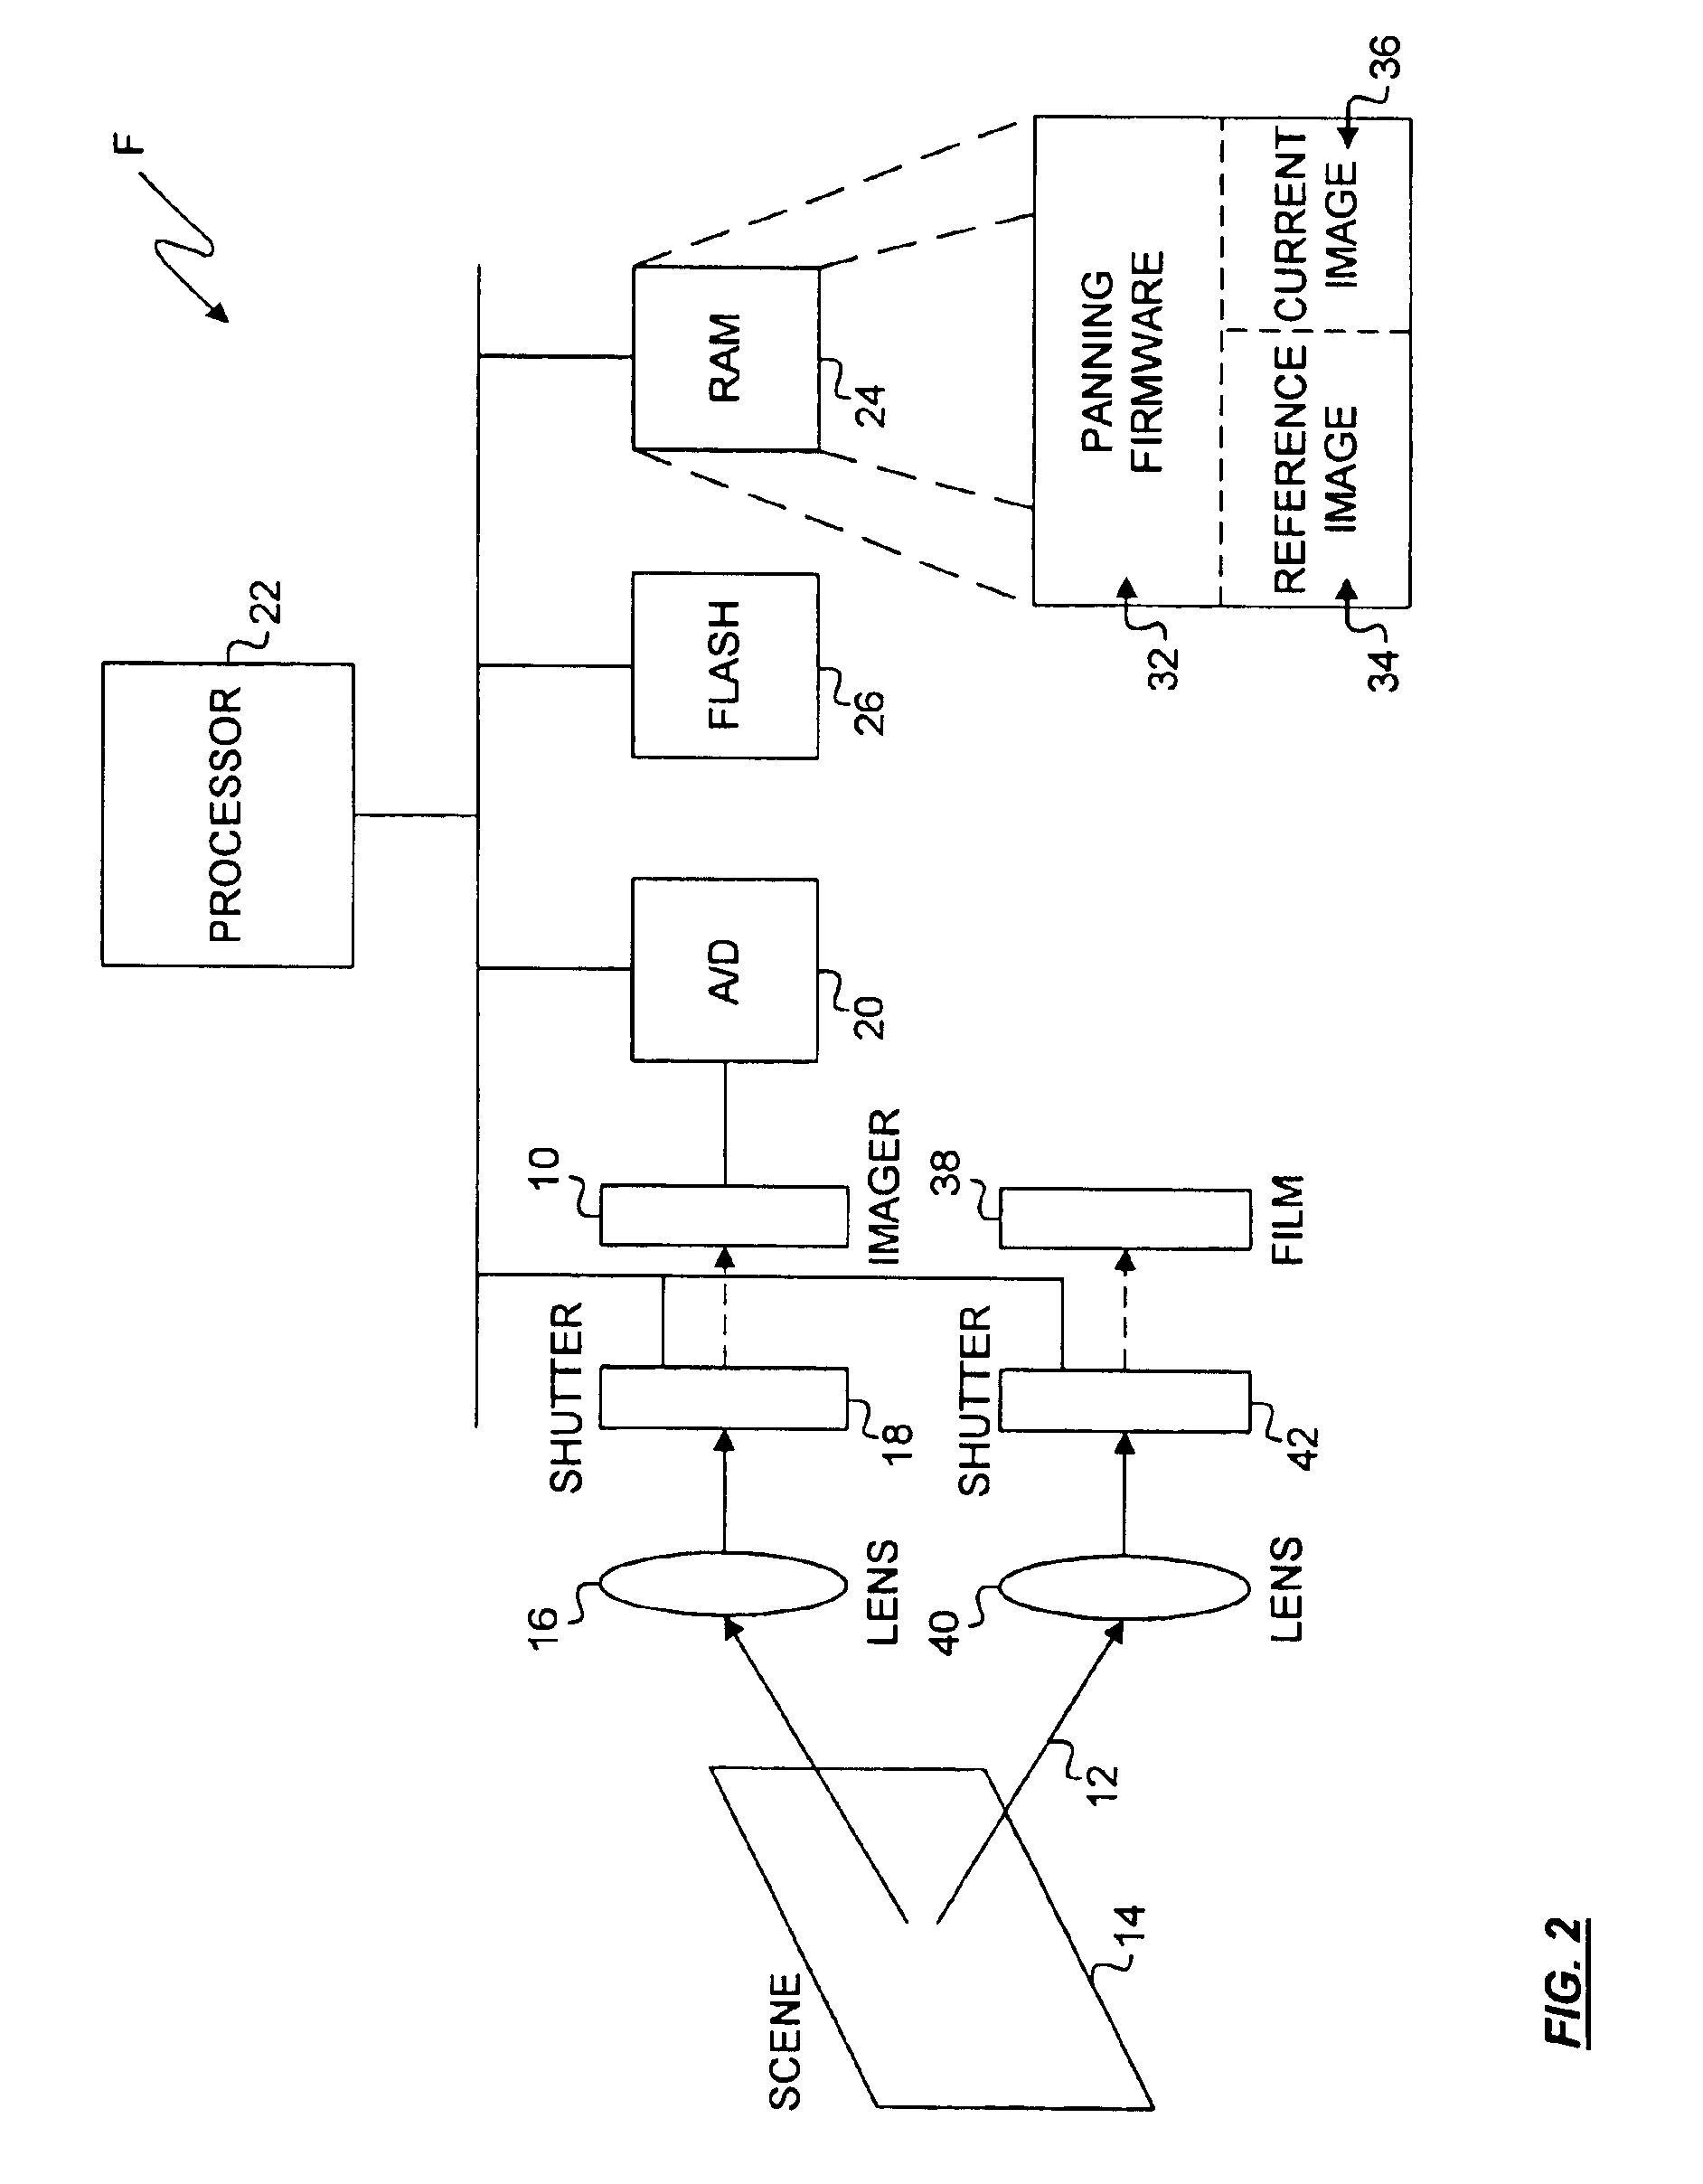 Method and apparatus for automatically capturing a plurality of images during a pan